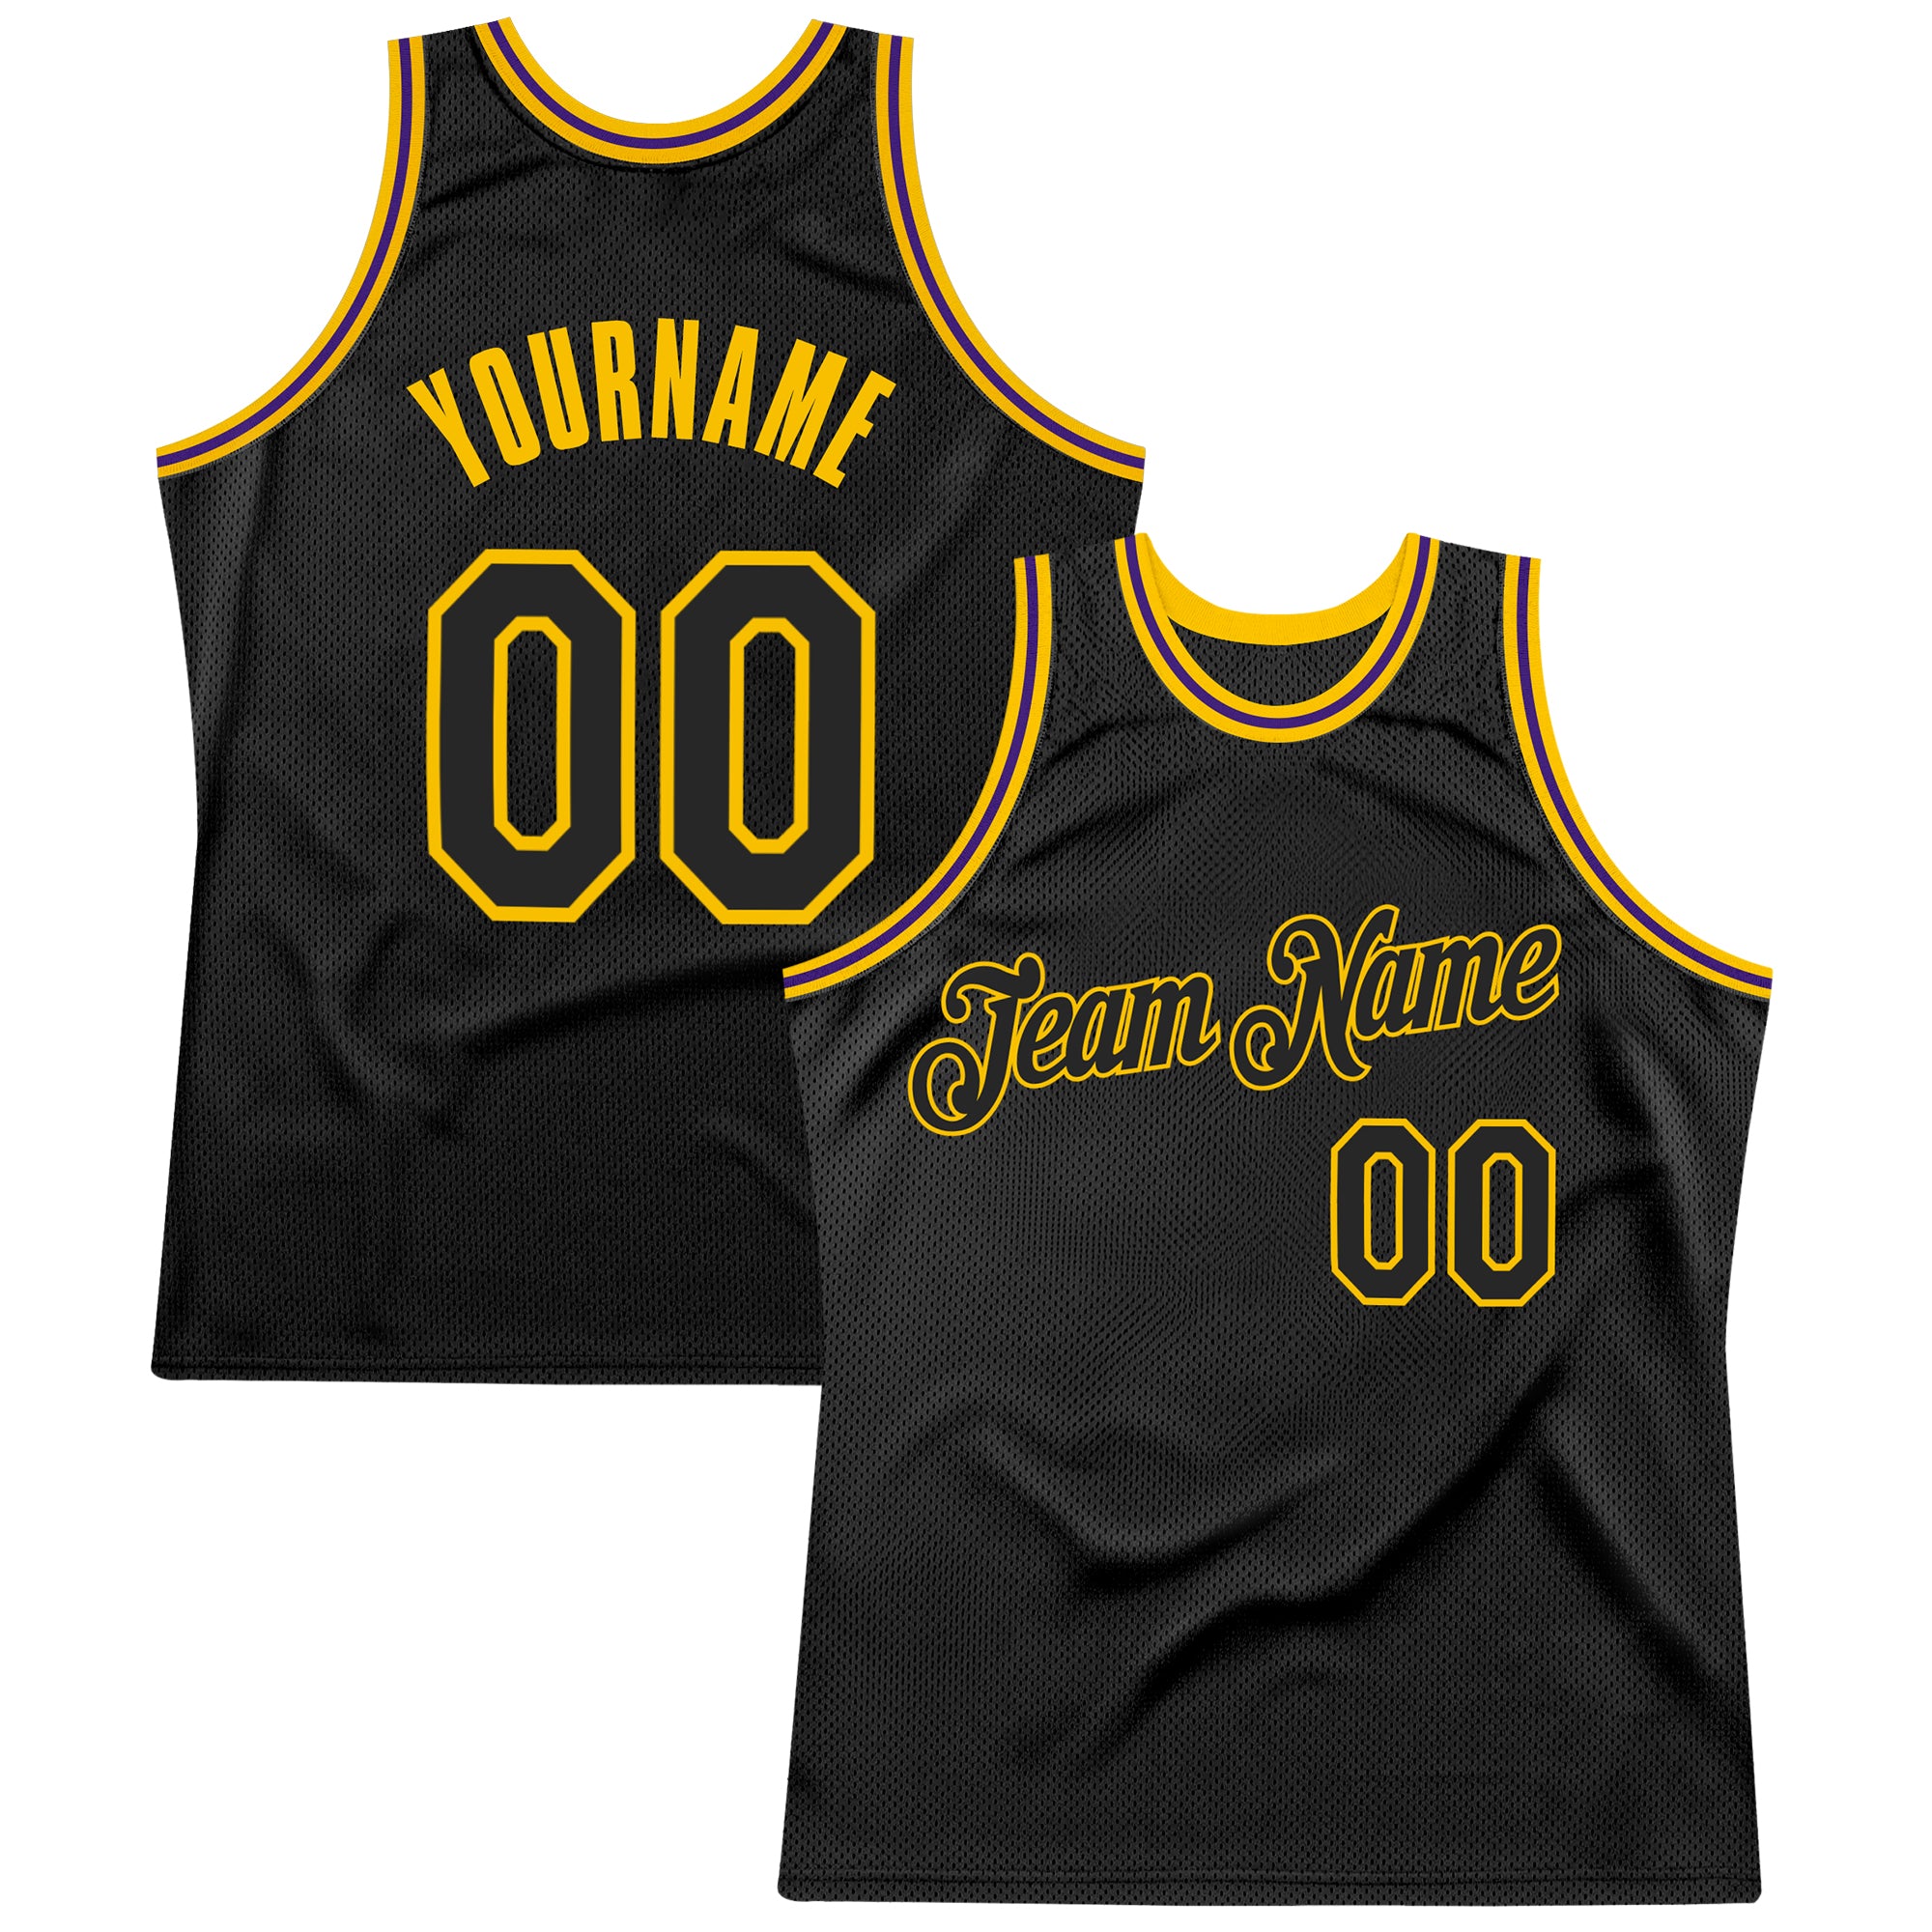 gold and black nba jersey